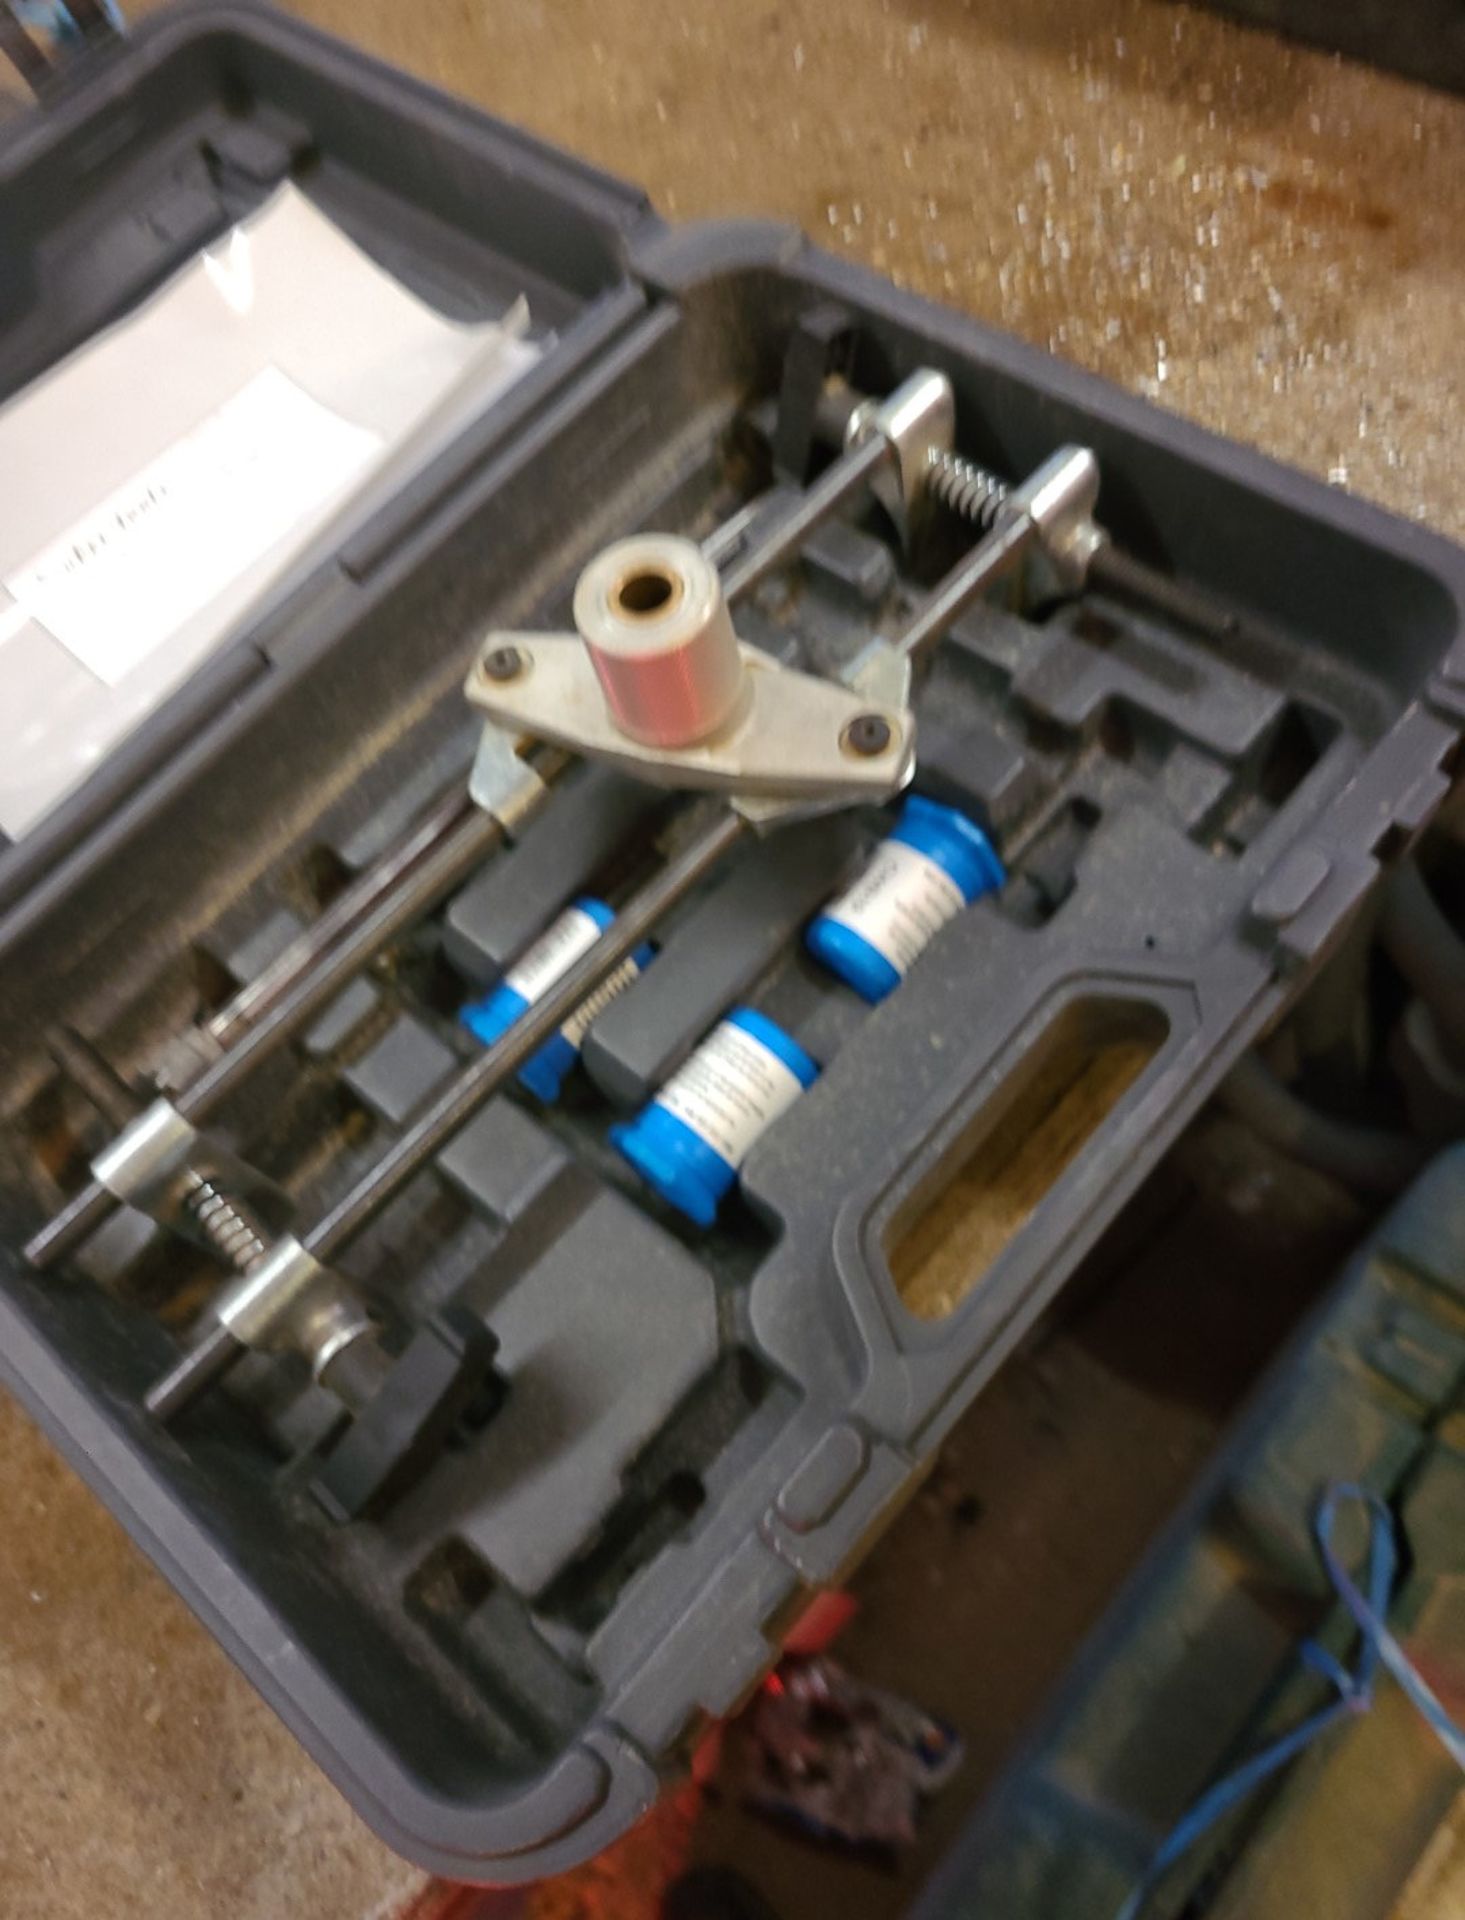 1 x Sauber Tools Dbb Morticer In Case - Ref: CNT159 - CL846 - Location: Oxford OX2This lot is from a - Image 3 of 4